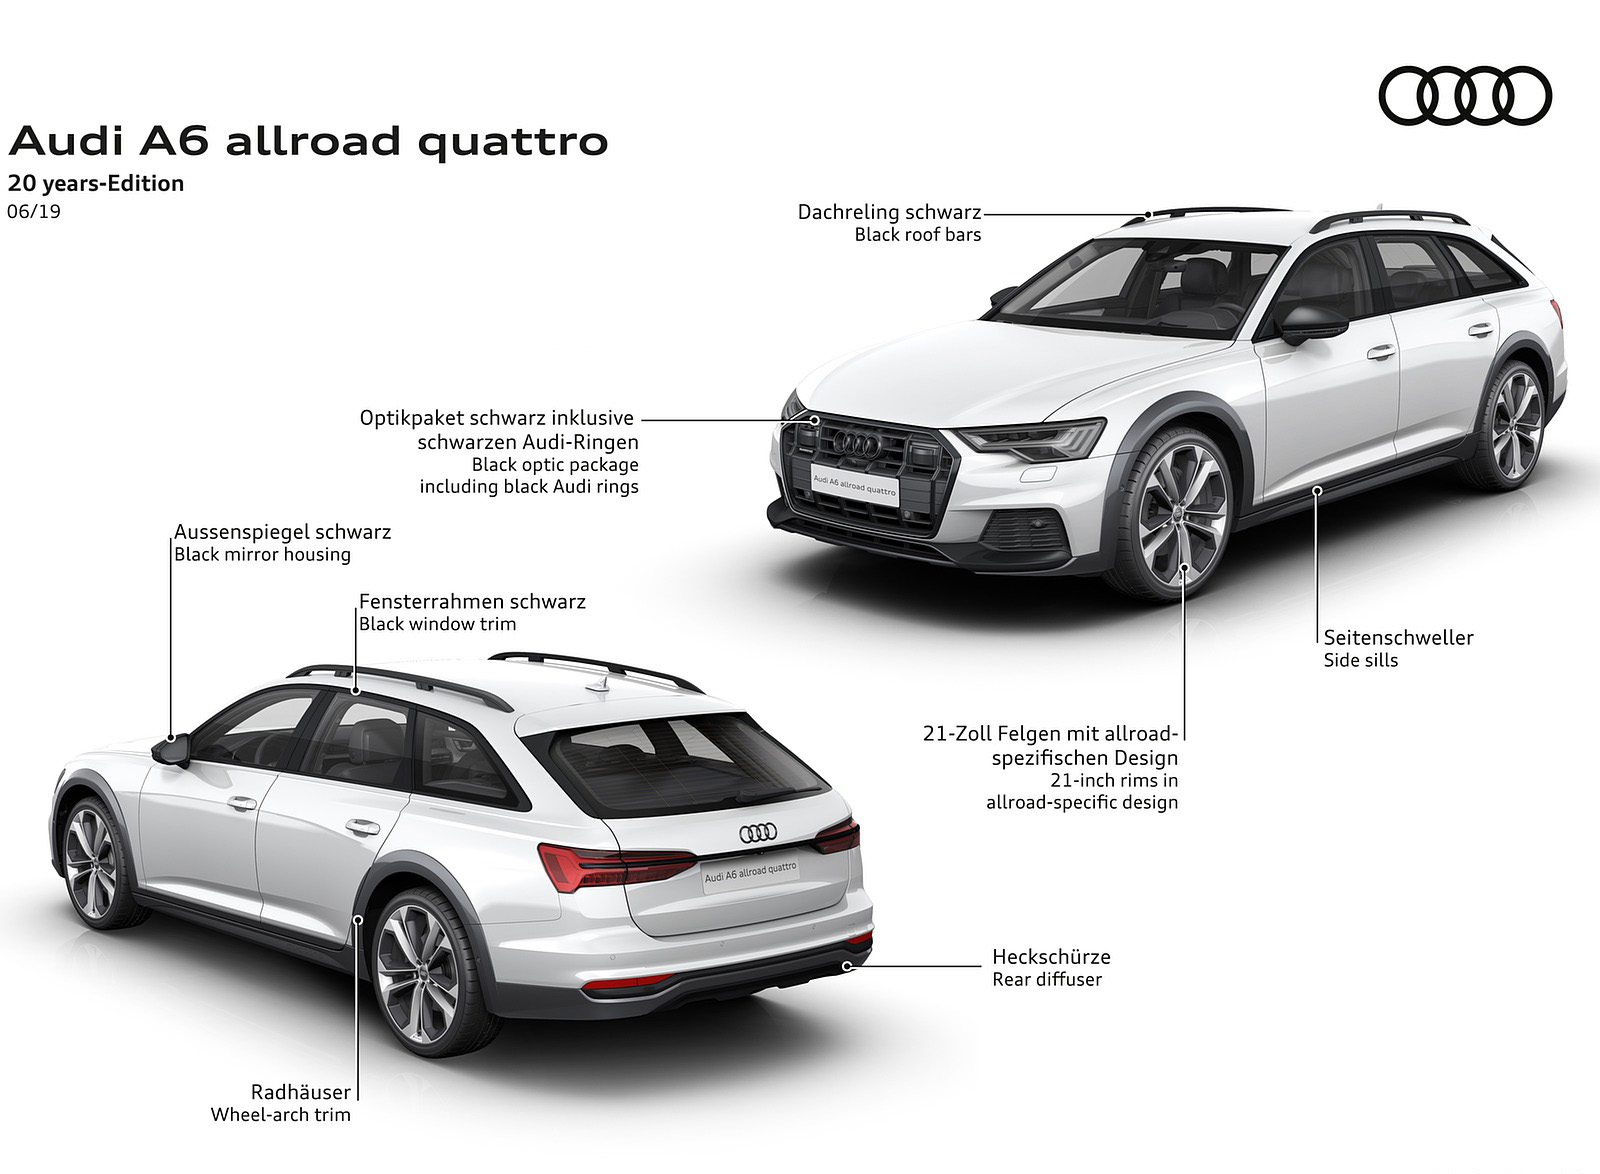 2020 Audi A6 allroad quattro 20 years-Edition Wallpapers #81 of 84